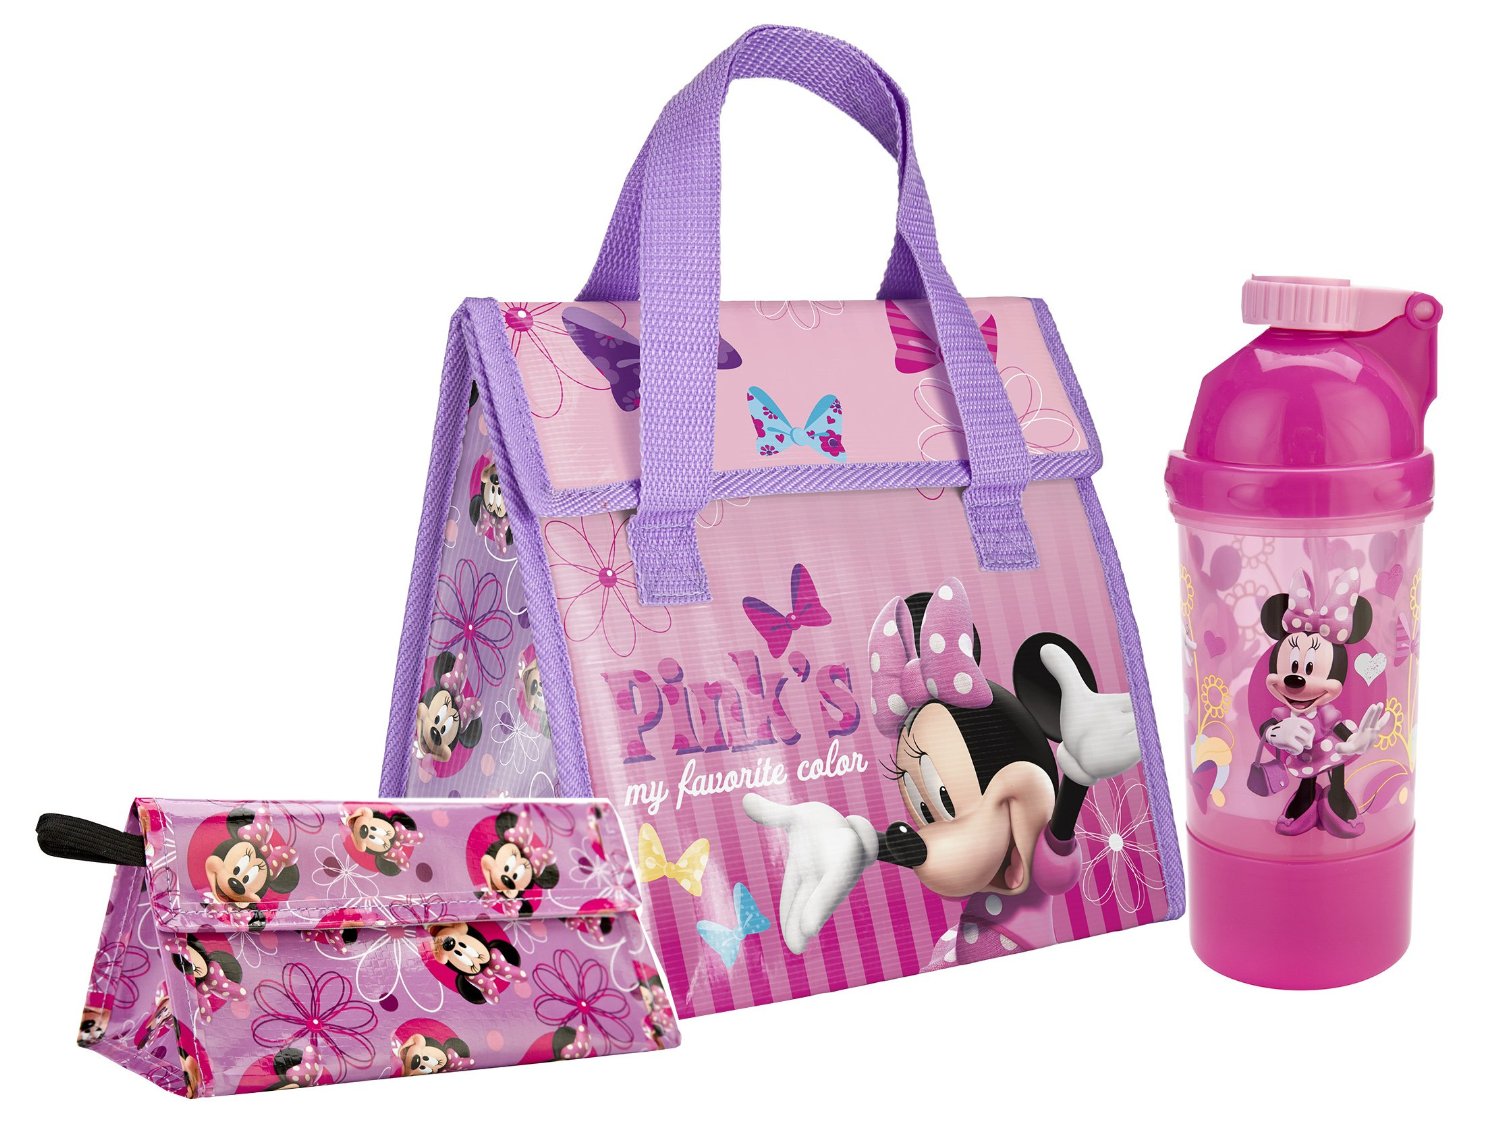 Zak Designs 3-Piece Lunchtime Set in Minnie Mouse – Just $11.47!